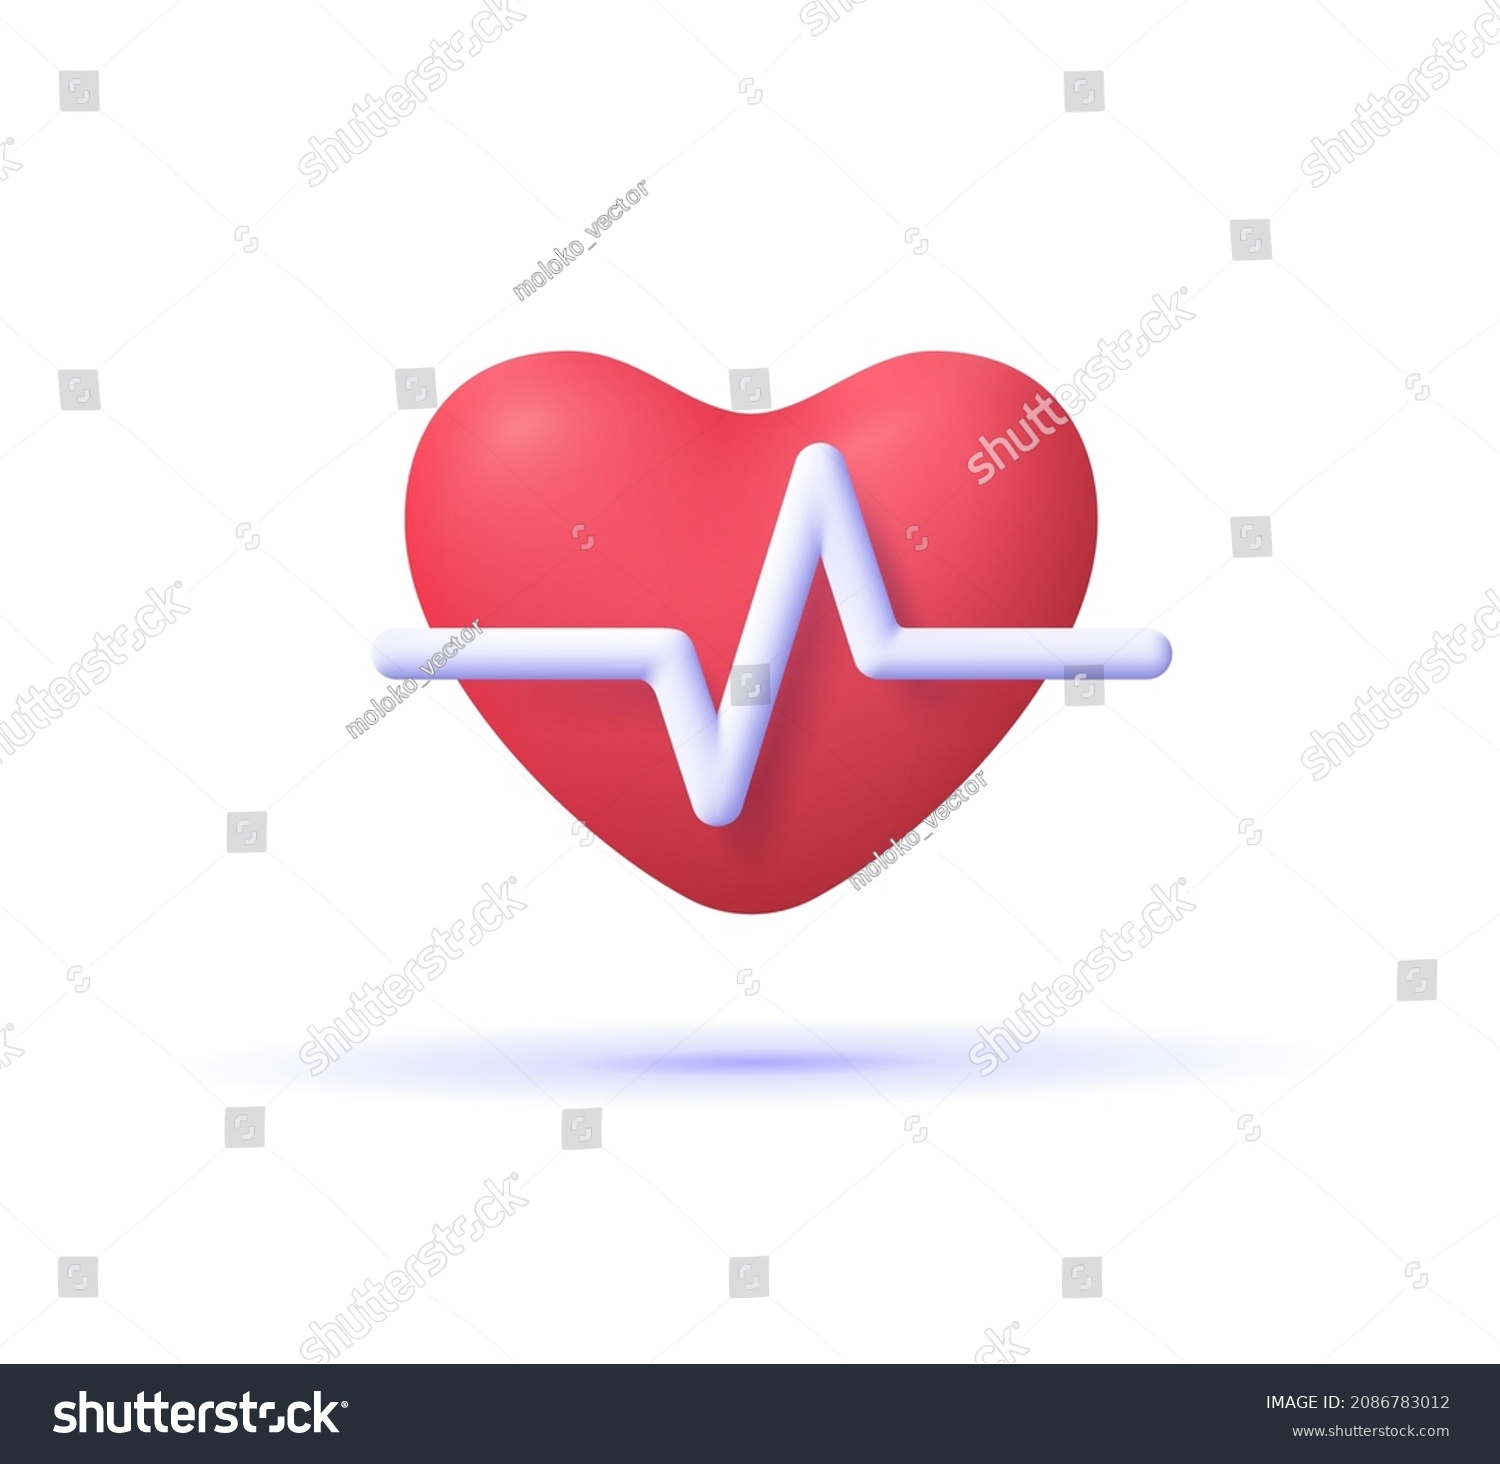 Red heart with white pulse line on white background. Heart pulse, heartbeat lone, cardiogram. Healthy lifestyle, cardiac assistance, pulse beat measure, medical healthcare concept. 3d vector icon.  #2086783012